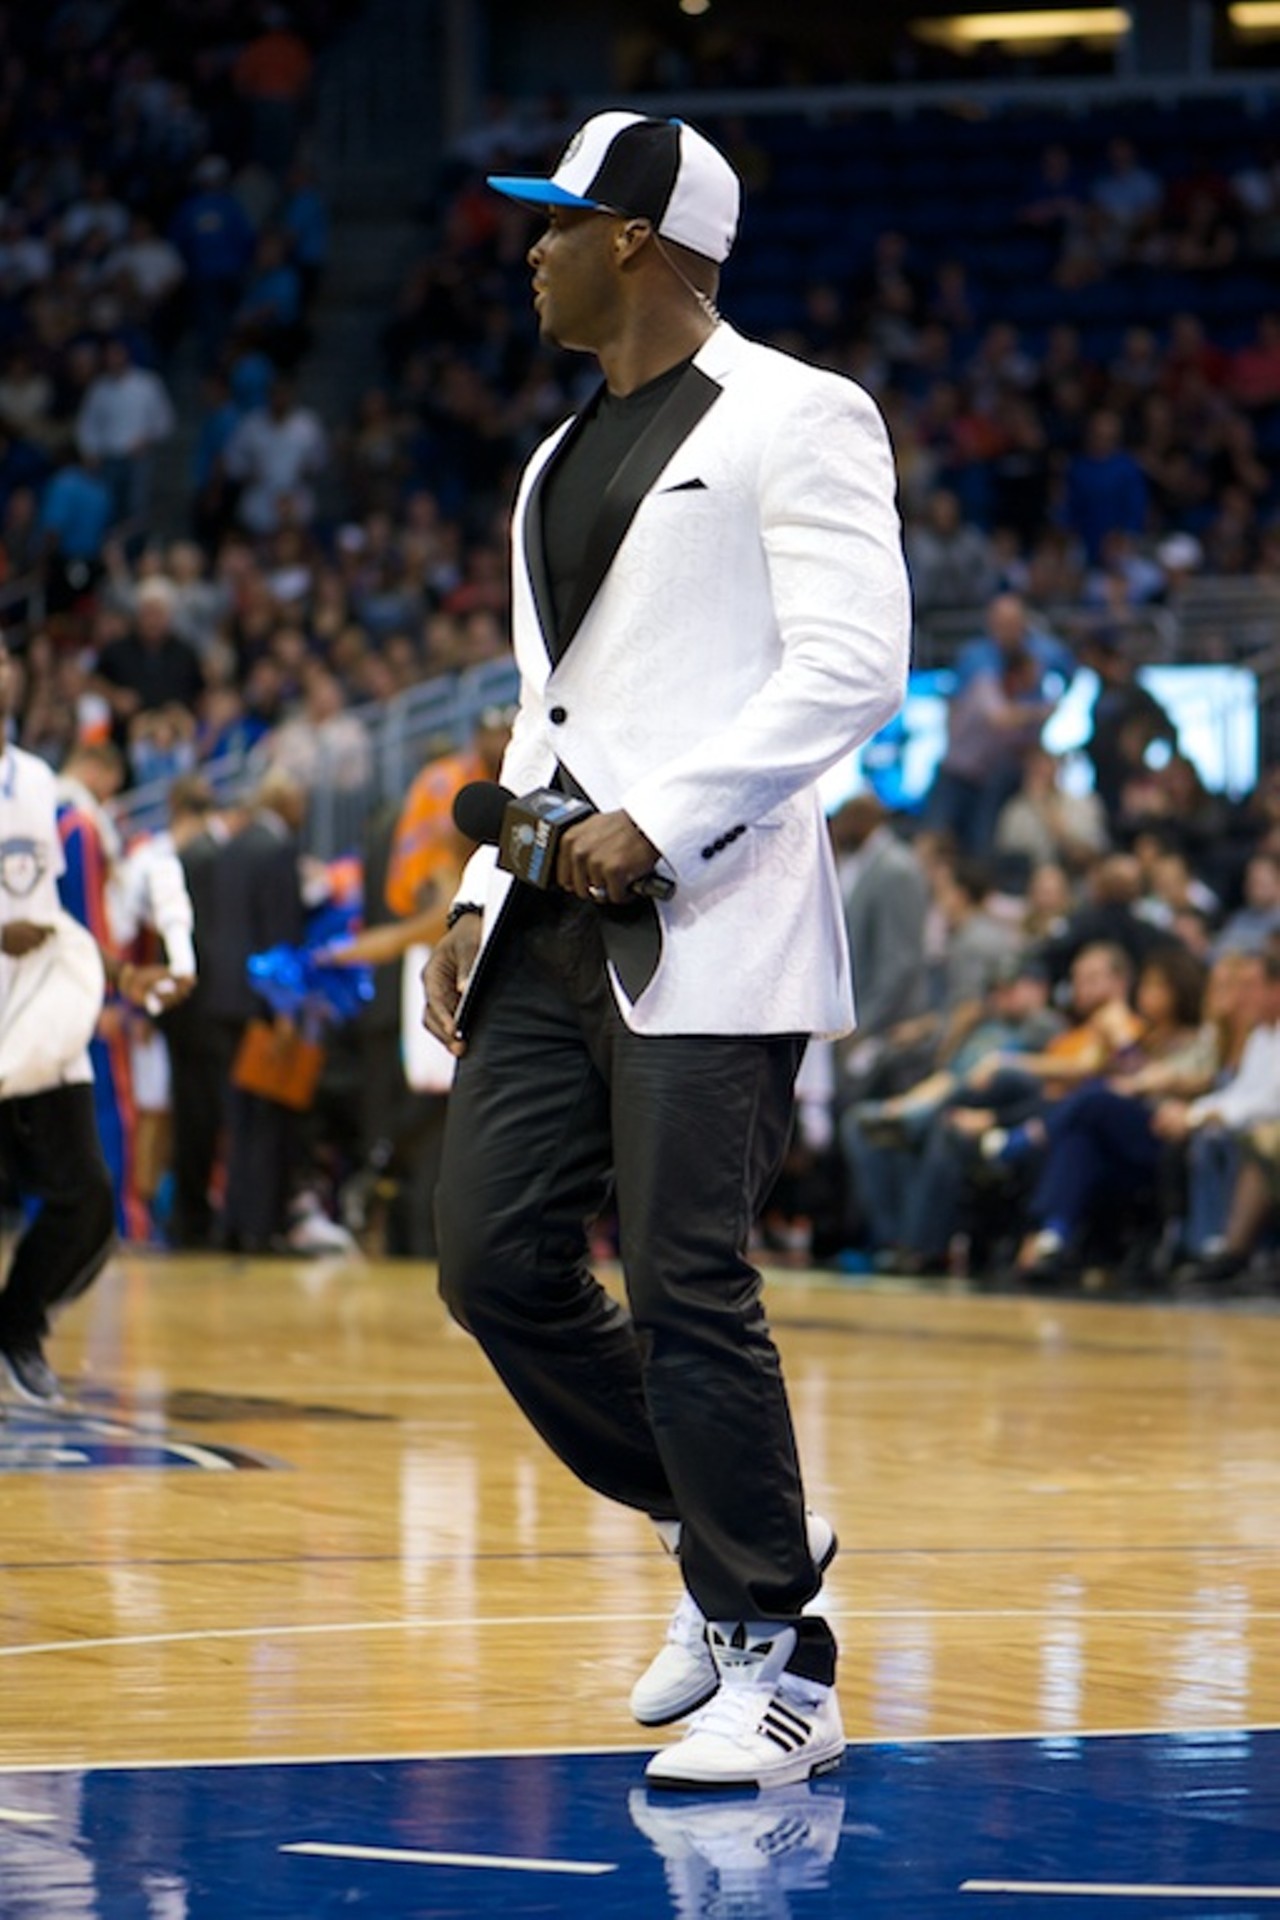 Photos from the Orlando Magic victory against the New York Knicks